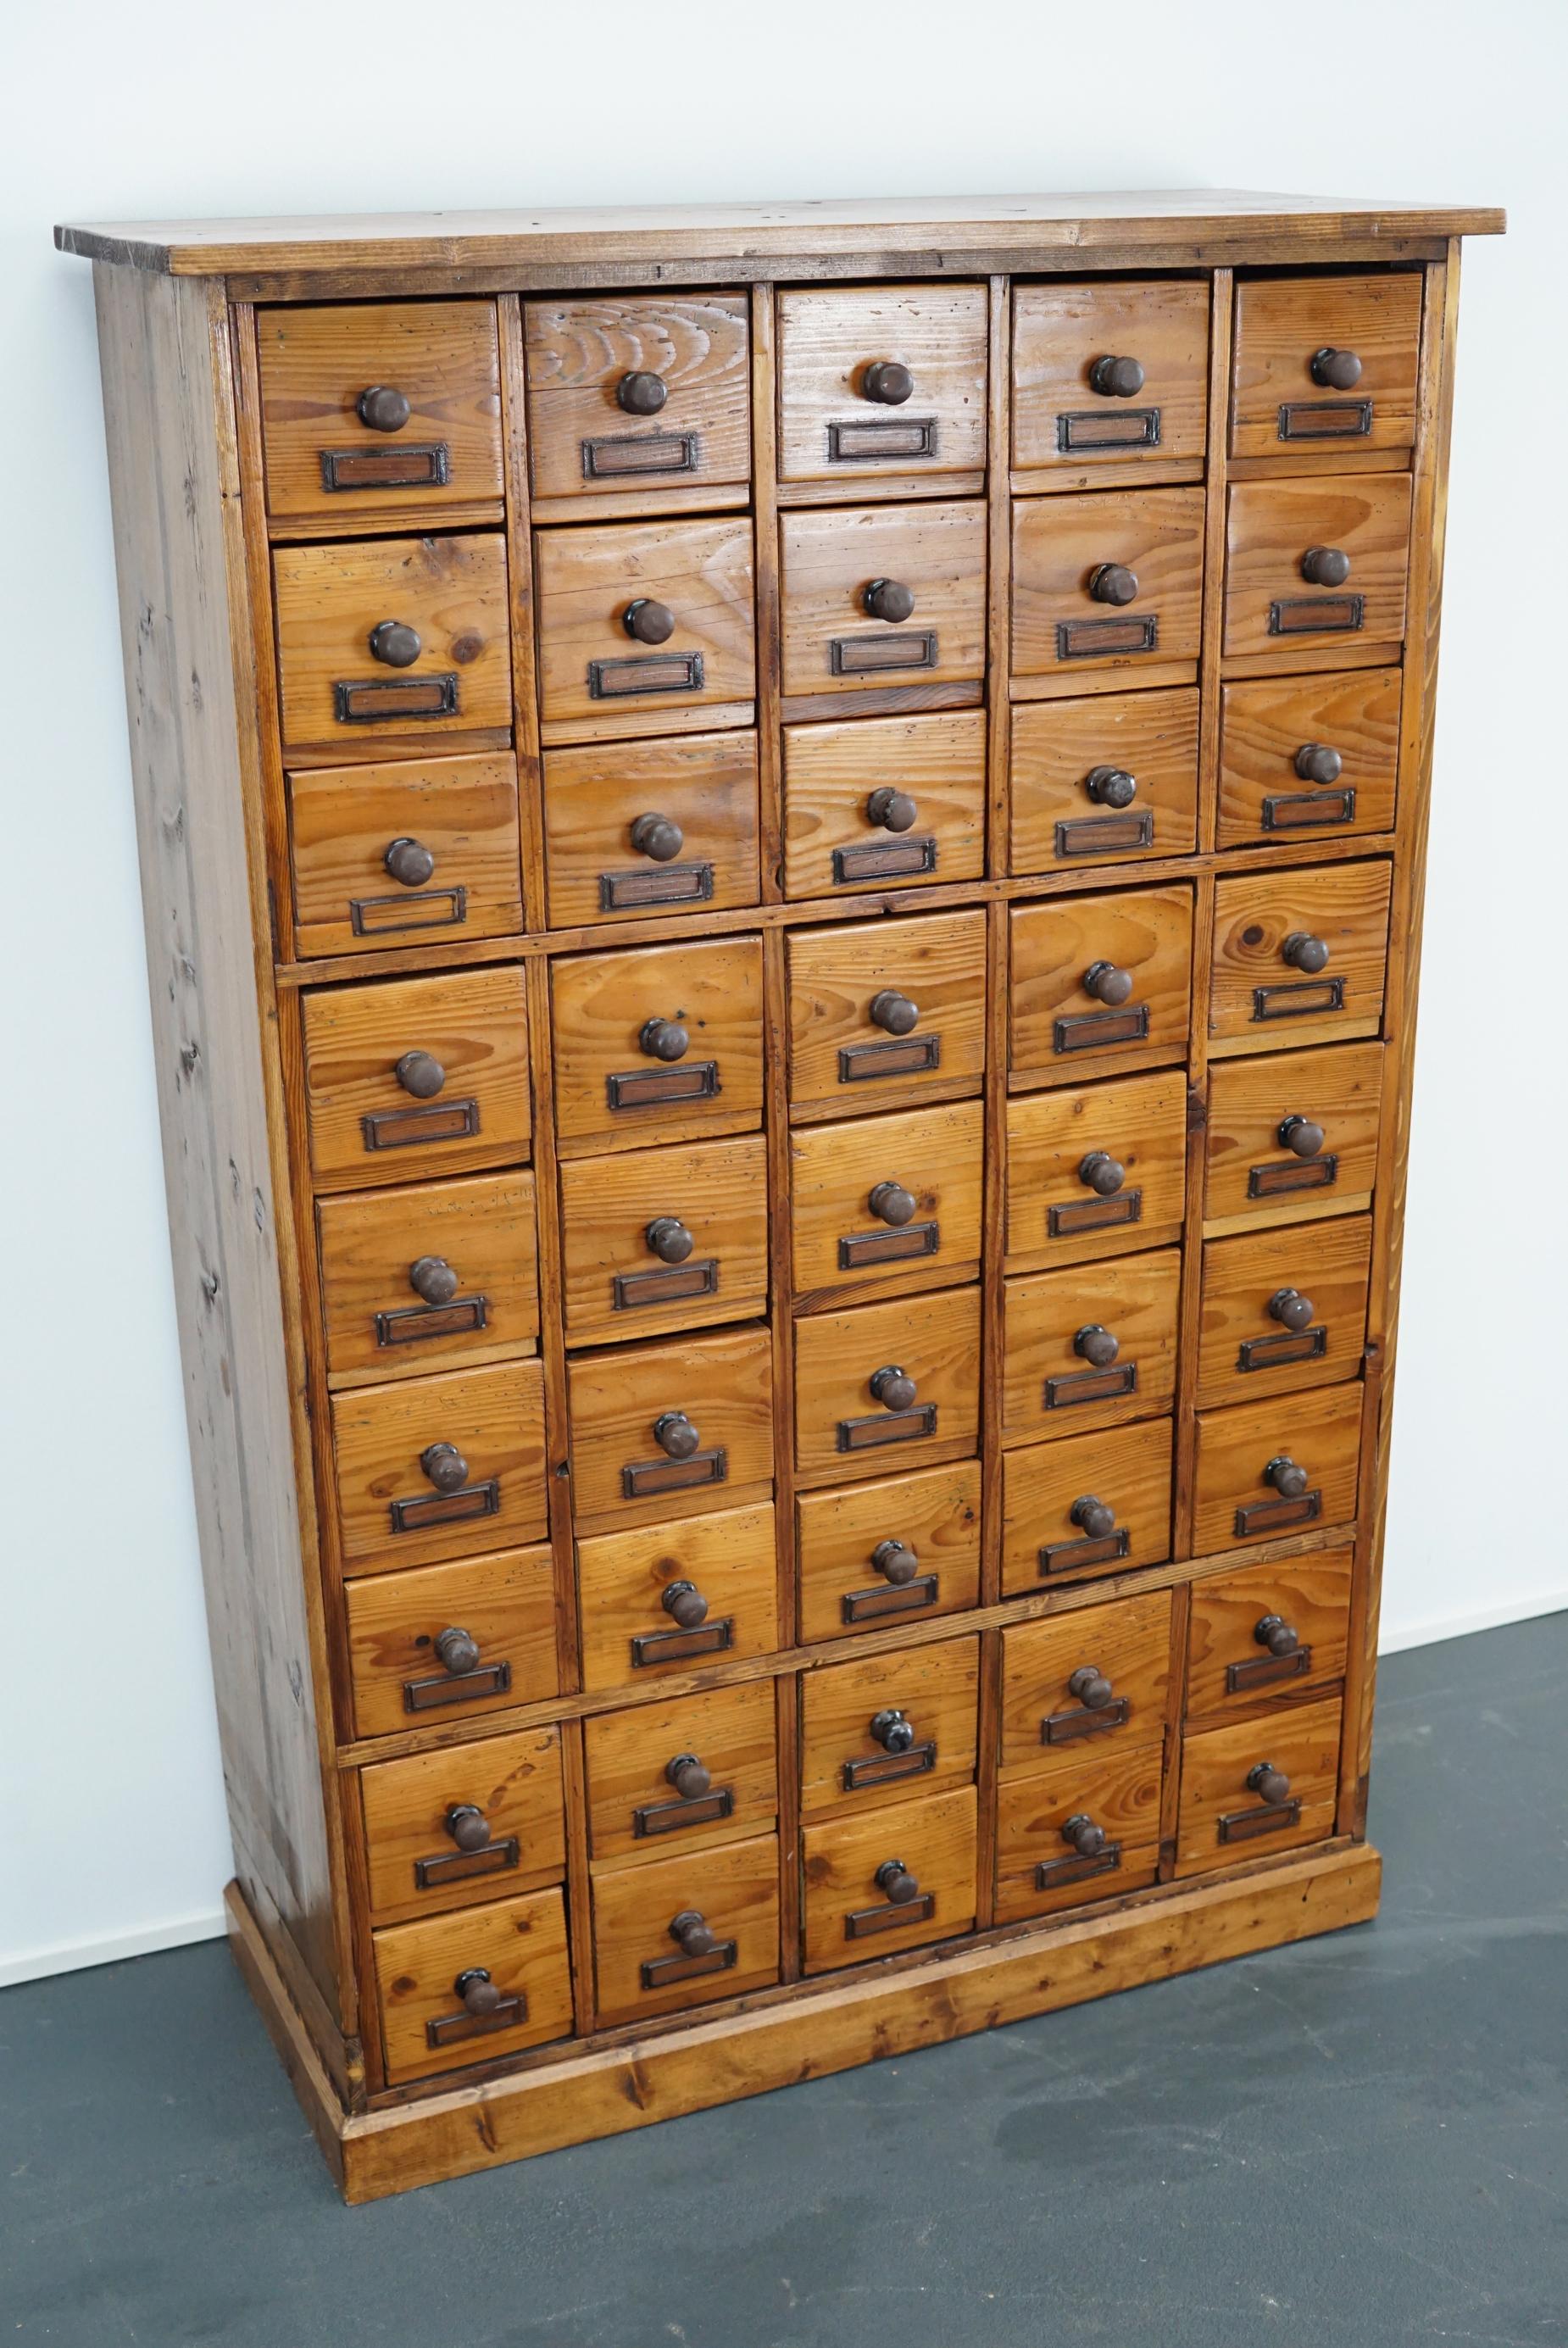 This apothecary cabinet of drawers was designed, circa 1930s in Germany. The piece is made from pine and features 45 drawers with metal hardware. The interior dimensions of the drawers are: W 12.5 x D 28 x H 9.5 cm.